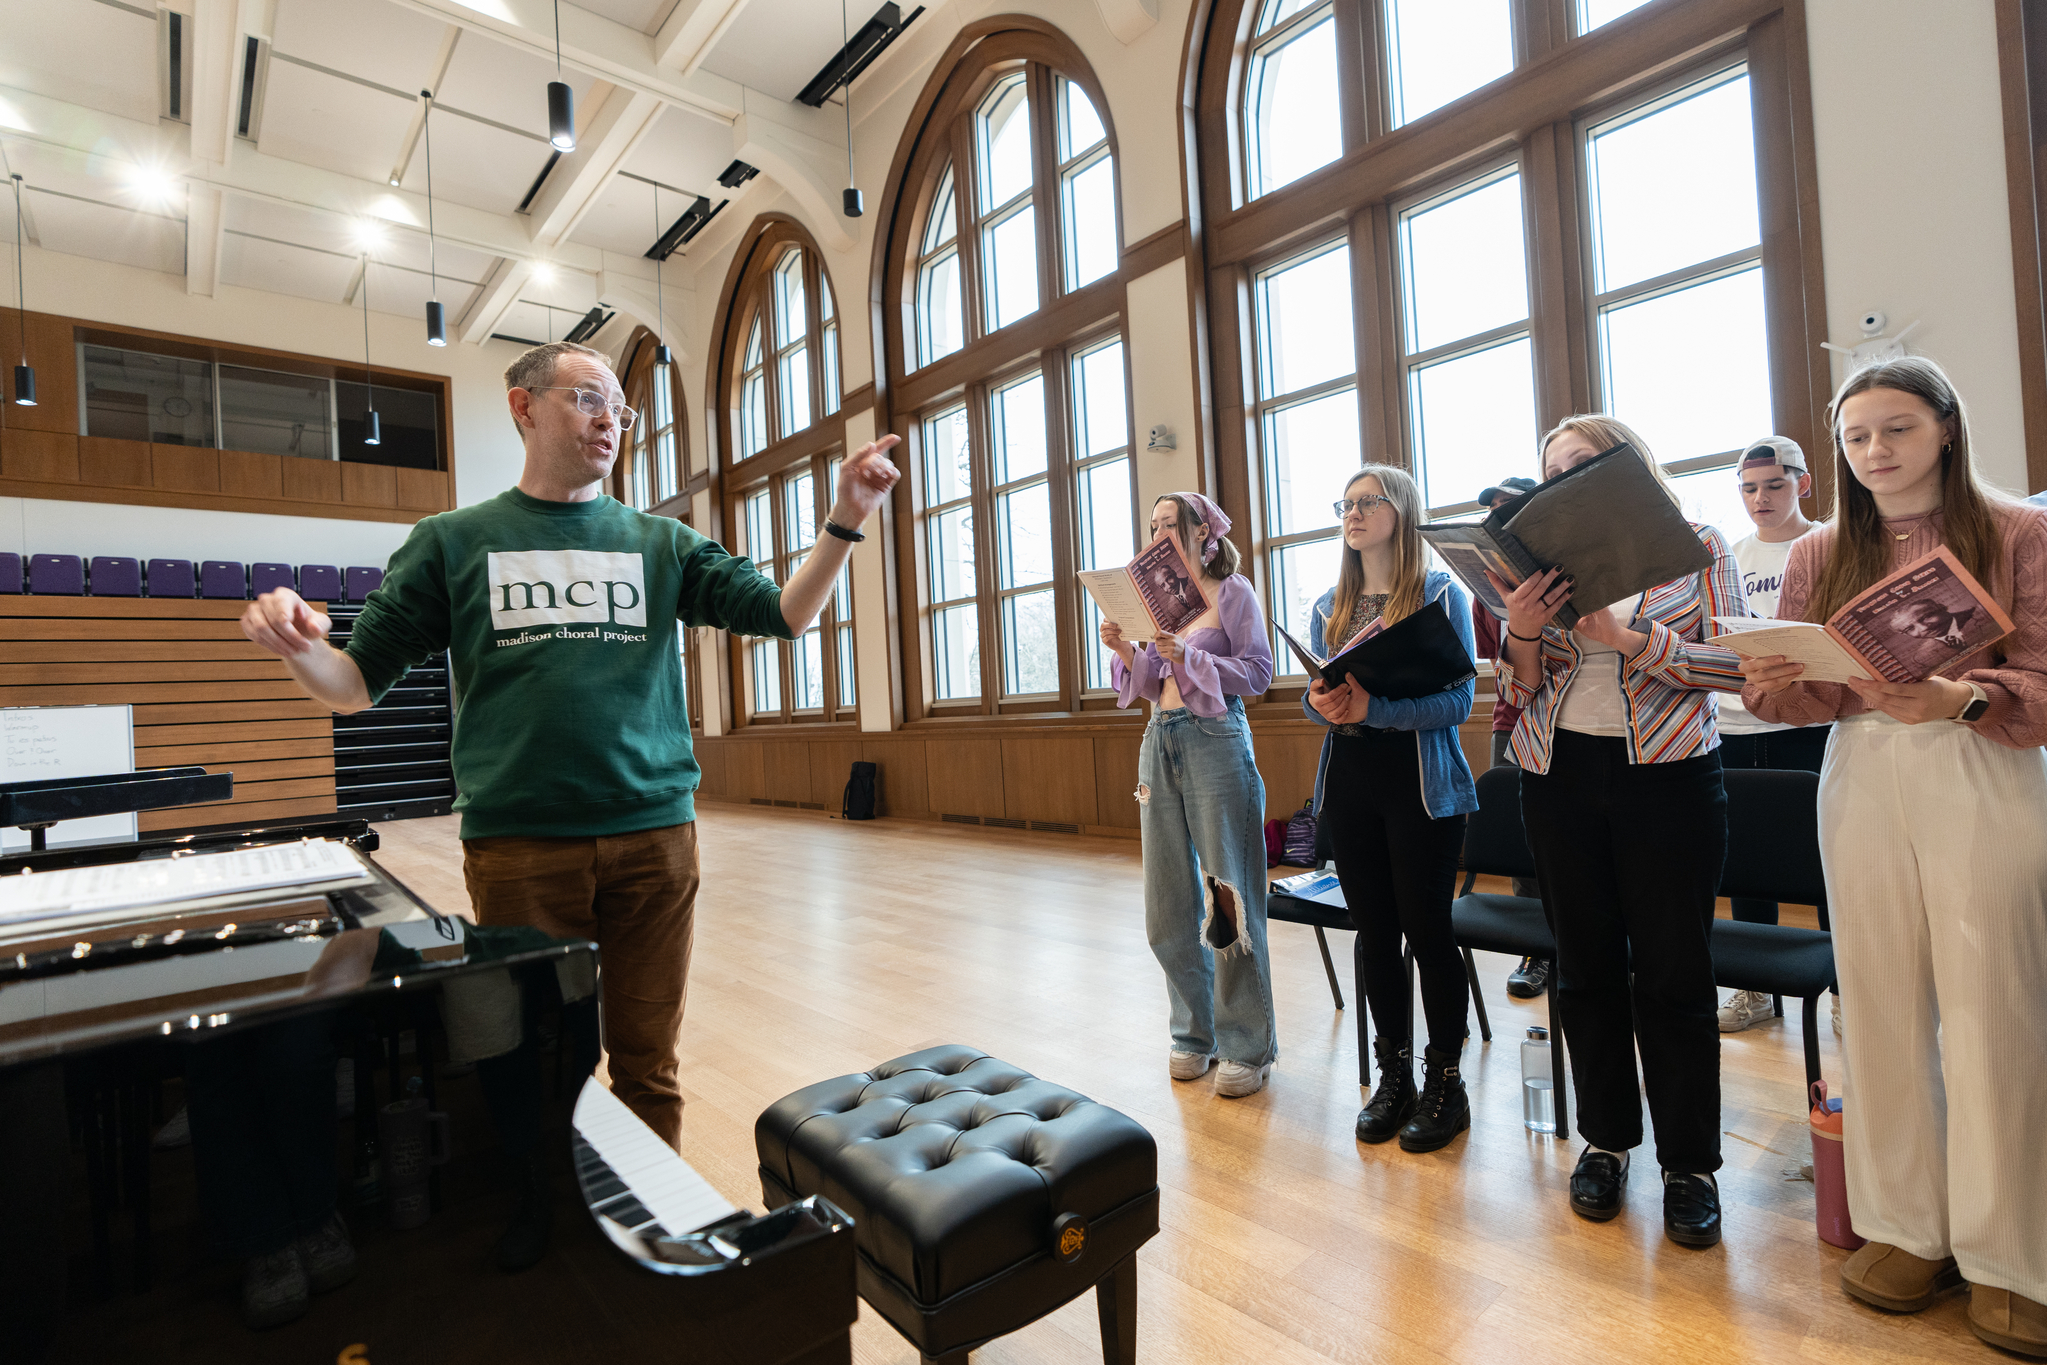 Professor leading students through the singing of a song in the performance hall